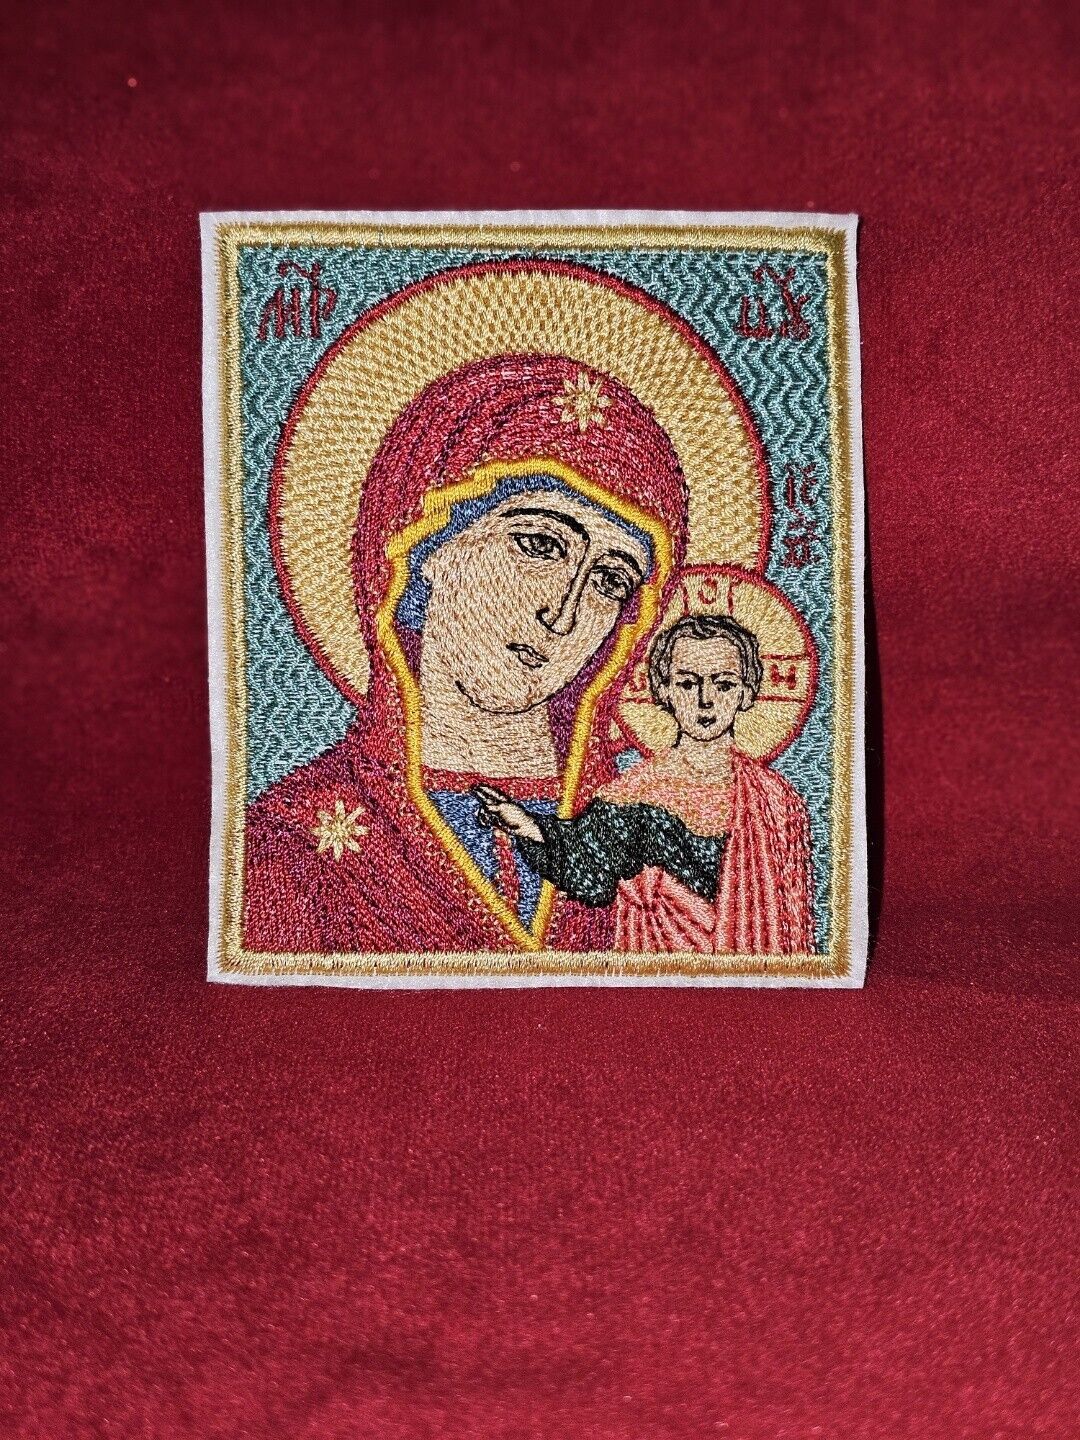 Our Lady of Kazan Pocket Orthodox Icon - Handcrafted 3.35×3.94 inches